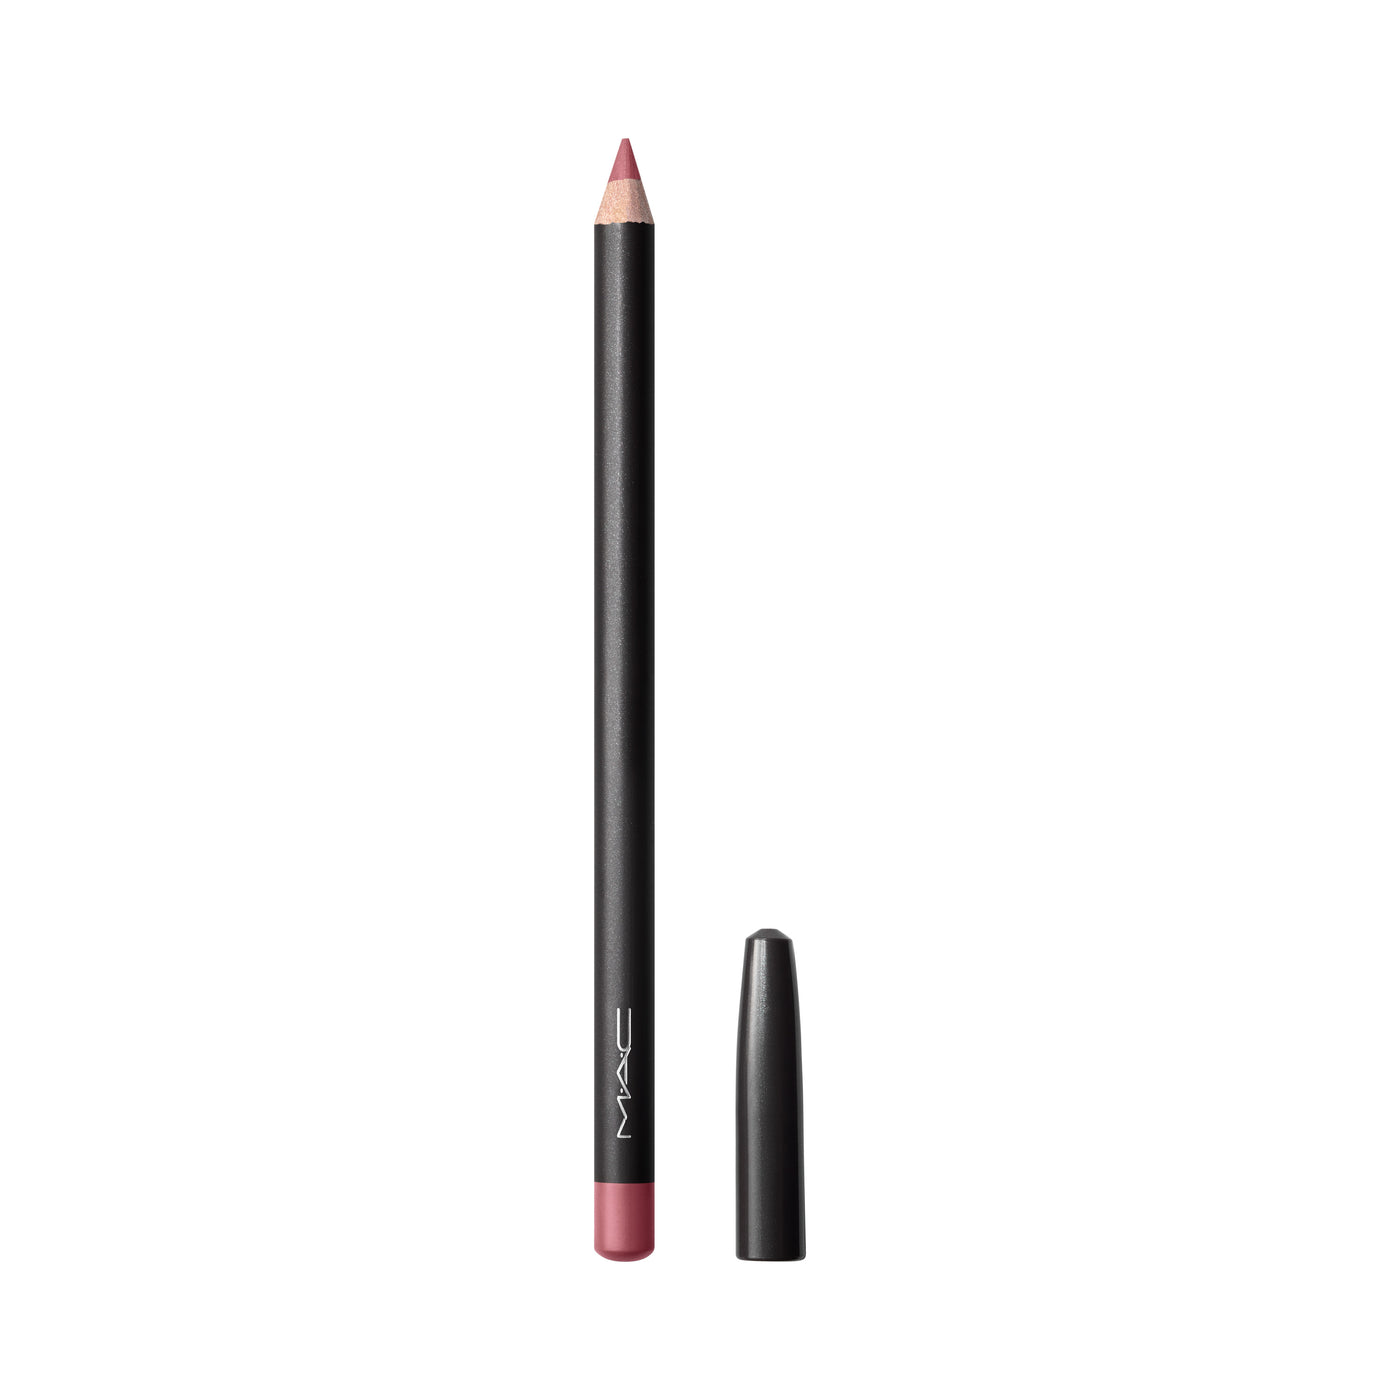 Shop The Latest Collection Of Mâ·Aâ·C Lip Pencil In Lebanon